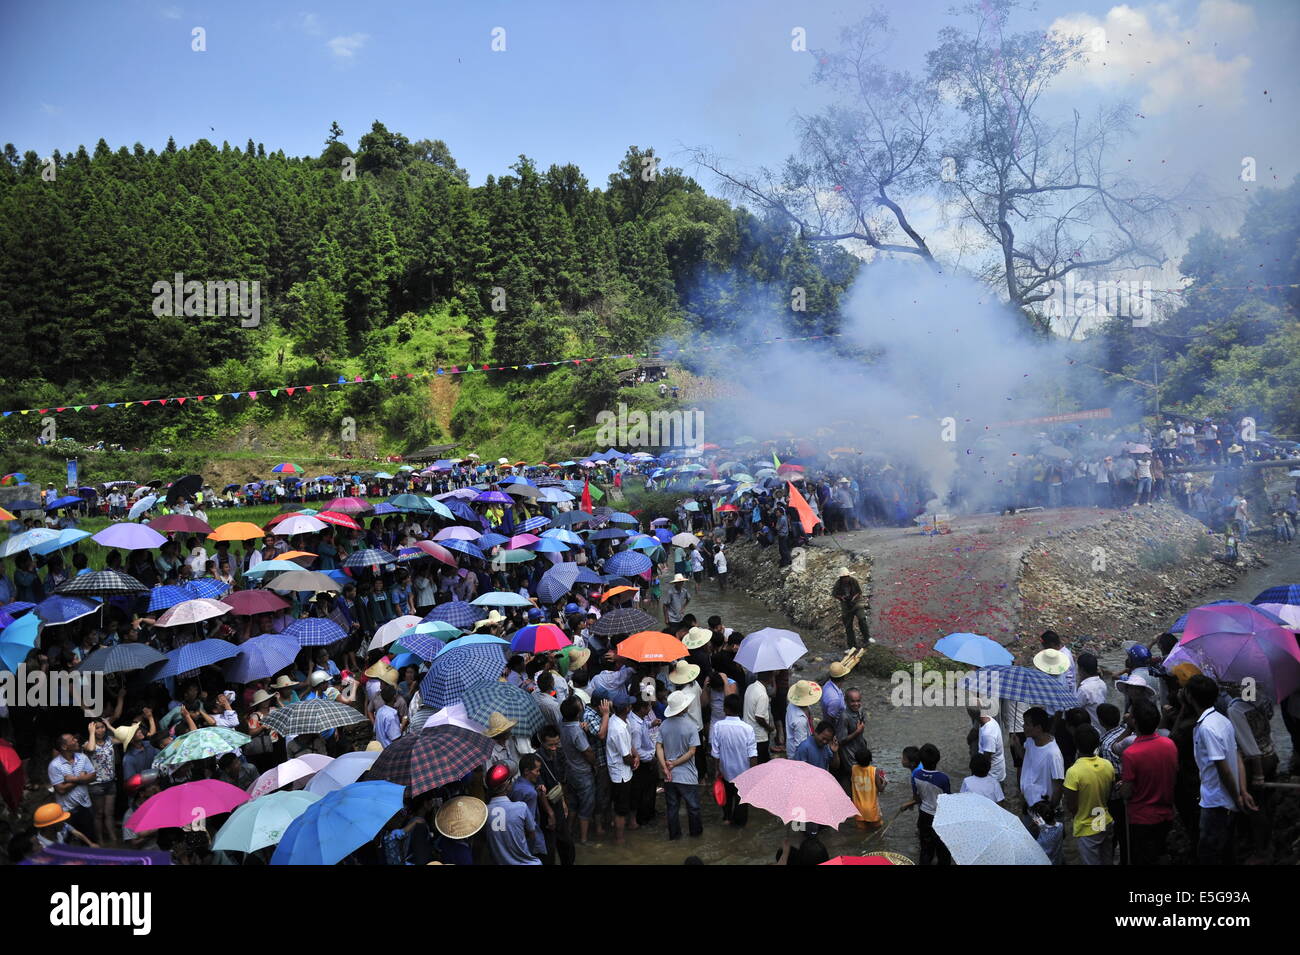 Qiandongnan, China's Guizhou Province. 30th July, 2014. People gather to celebrate the 'Naoyu' Festival in Congjiang County in Qiandongnan Miao and Dong Autonomous Perfecture, southwest China's Guizhou Province, July 30, 2014. 'Naoyu' Festival is a traditional folk custom with a history of over 450 years. People battle for live fish for the wish of harvest and happy life. © Liang Guangyuan/Xinhua/Alamy Live News Stock Photo